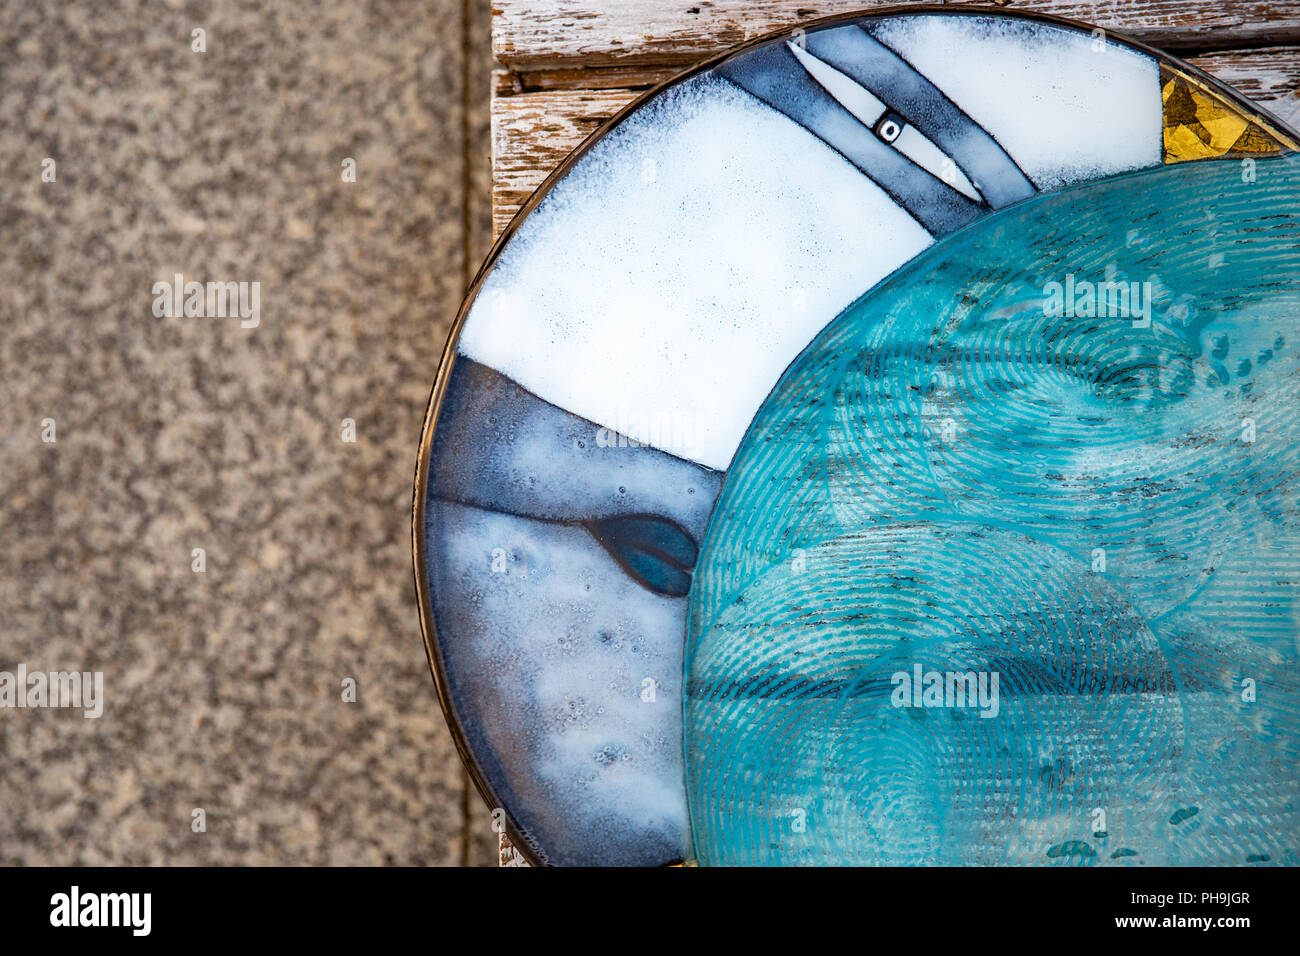 Artistic glass plates laying on a wooden table. Krosno, Poland. Concept Stock Photo